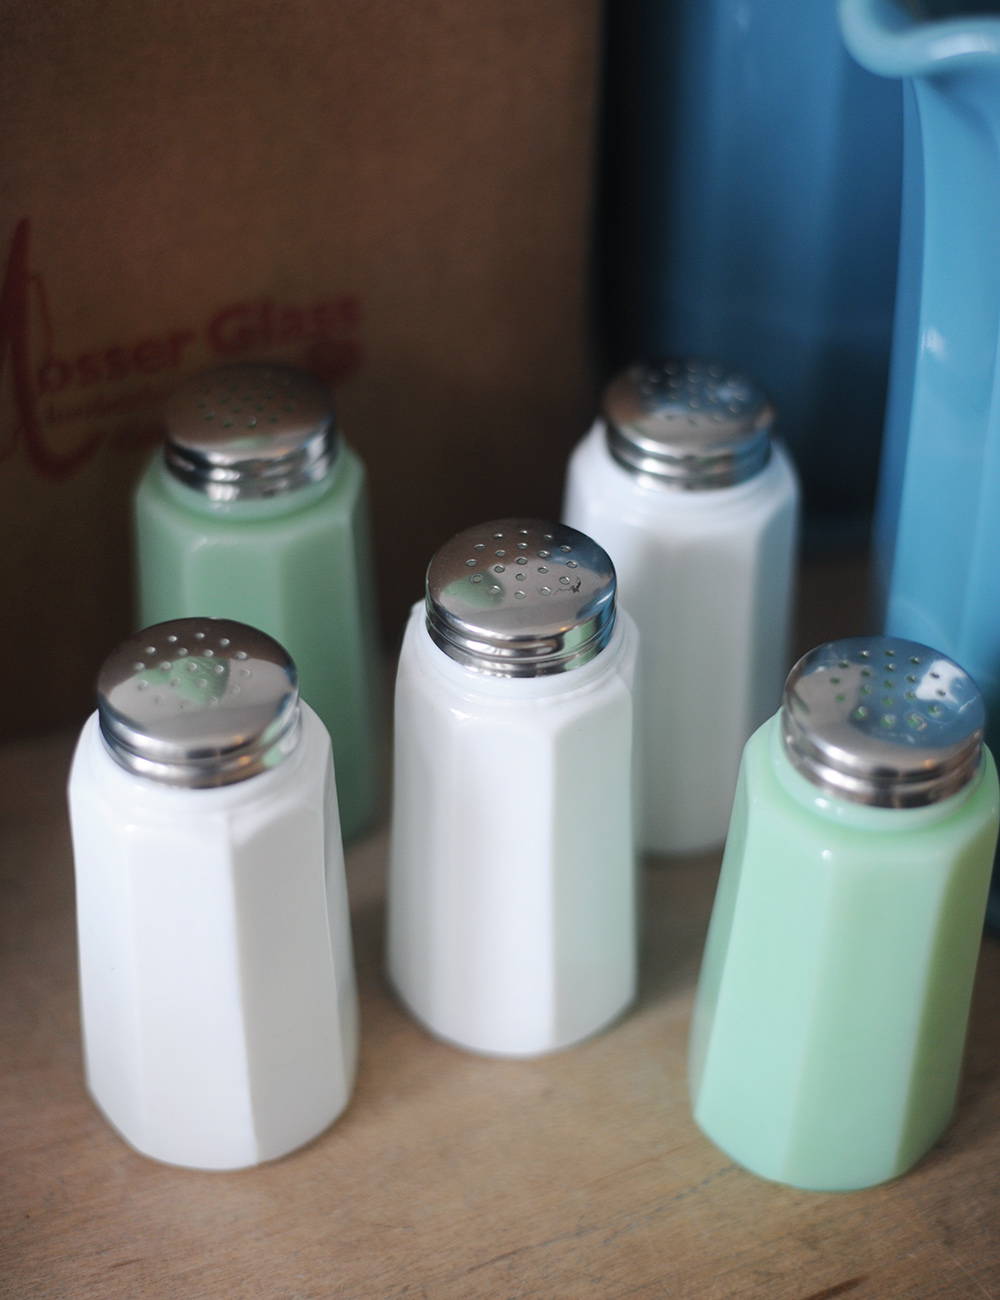 The Mosser Shakers in Milk and Jade.